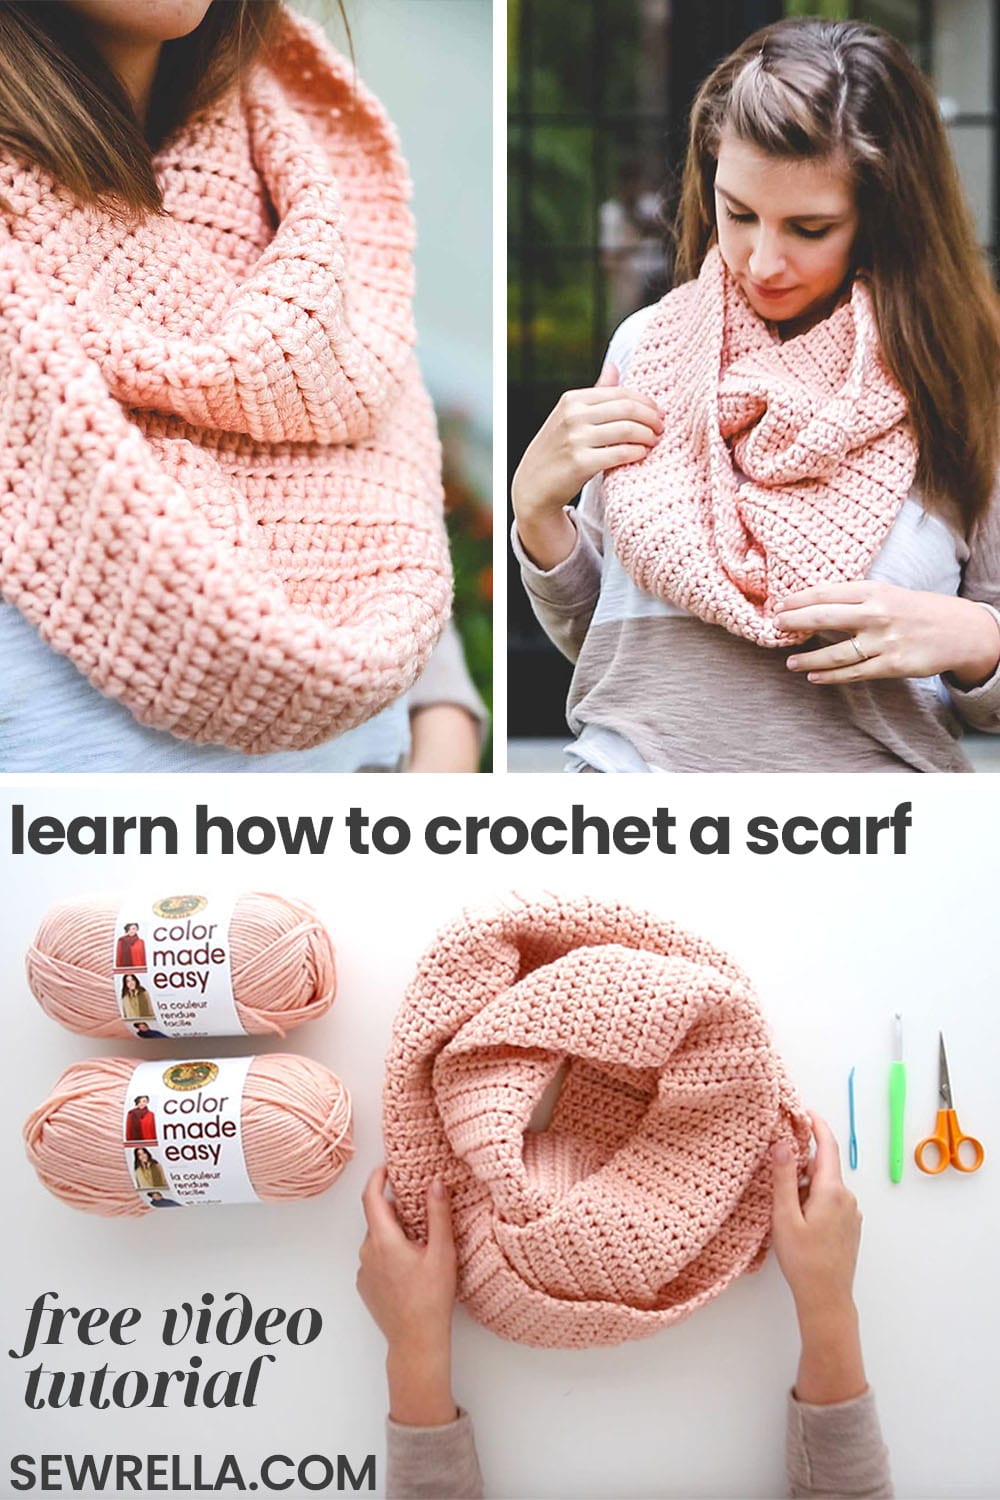 How to Crochet a Scarf   no experience needed • Sewrella